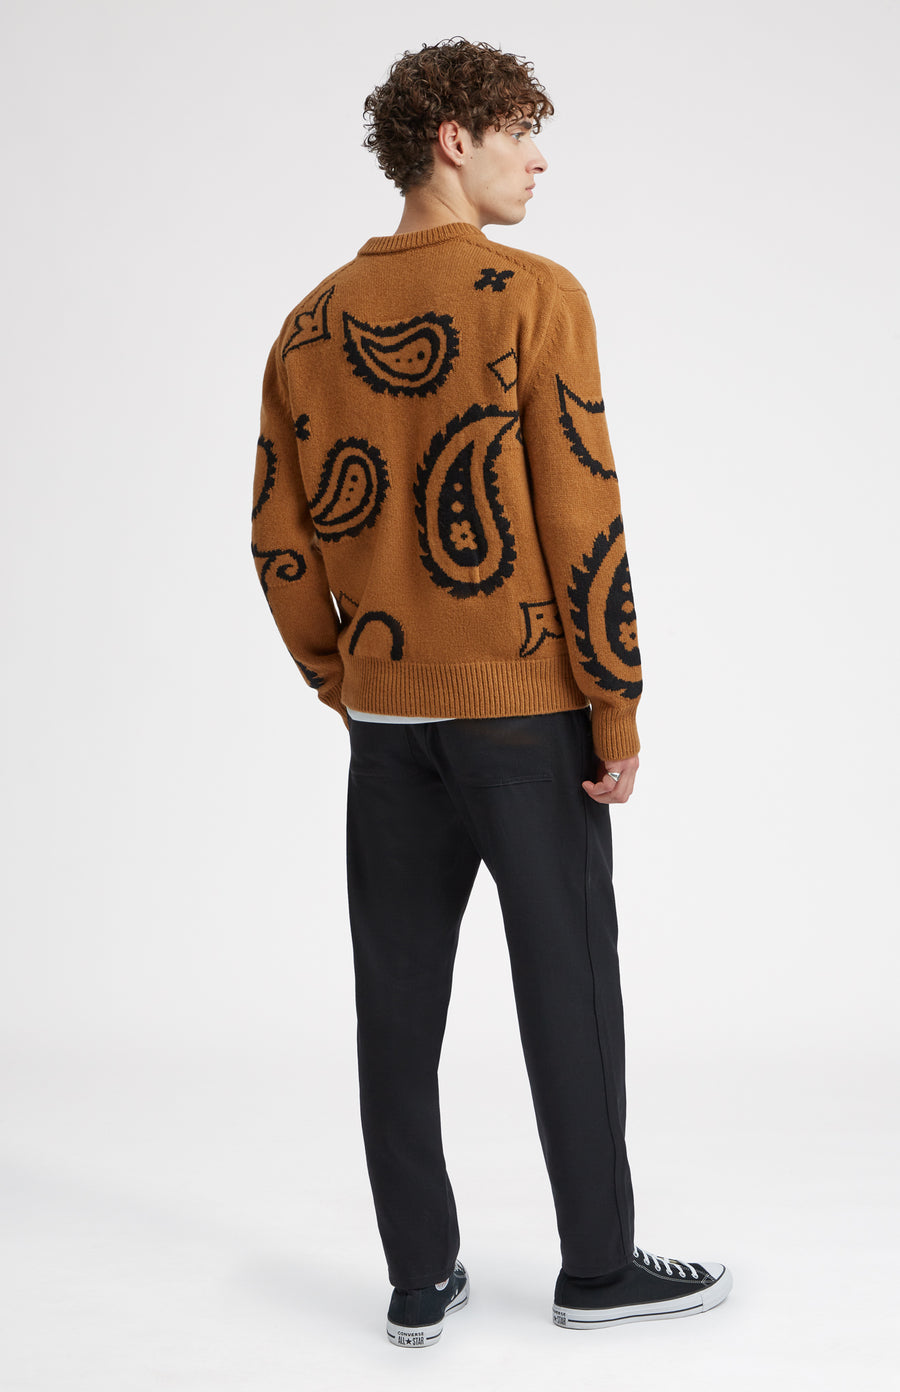 Paisley Lambswool Jumper in Vicuna & Black rear view - Pringle of Scotland